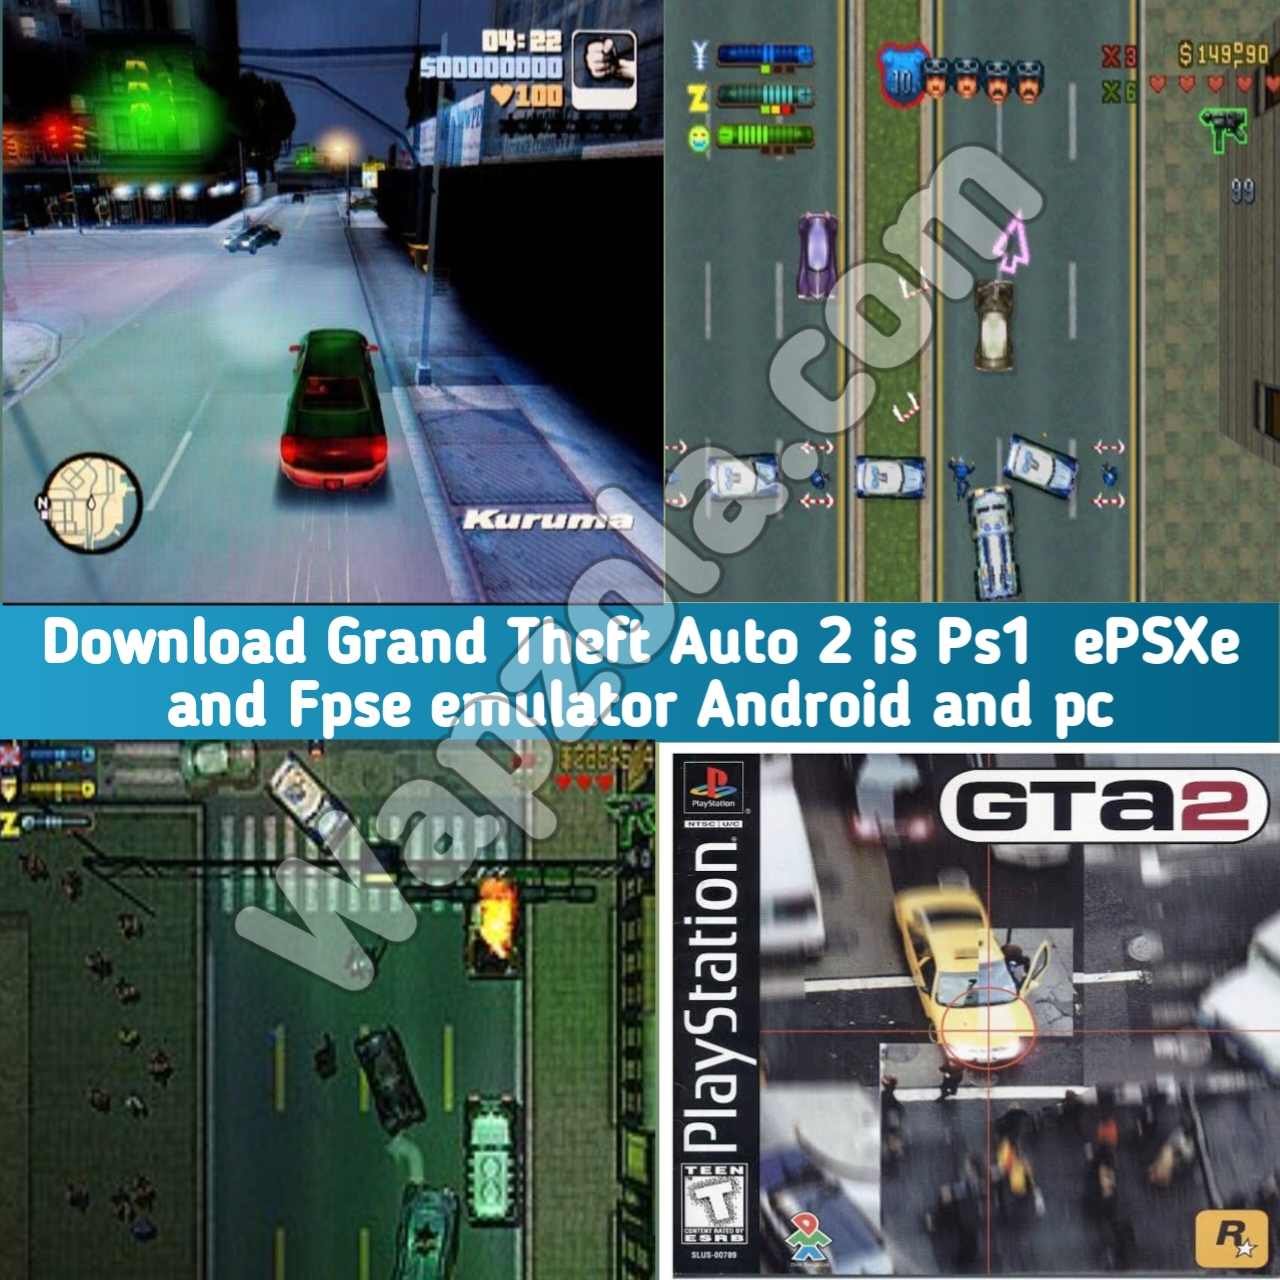 [Download] Grand Theft Auto 2 ROM (ISO) ePSXe and Fpse emulator (355MB size) highly compressed – Sony Playstation / PSX / PS1 APK BIN/CUE play on Android and pc